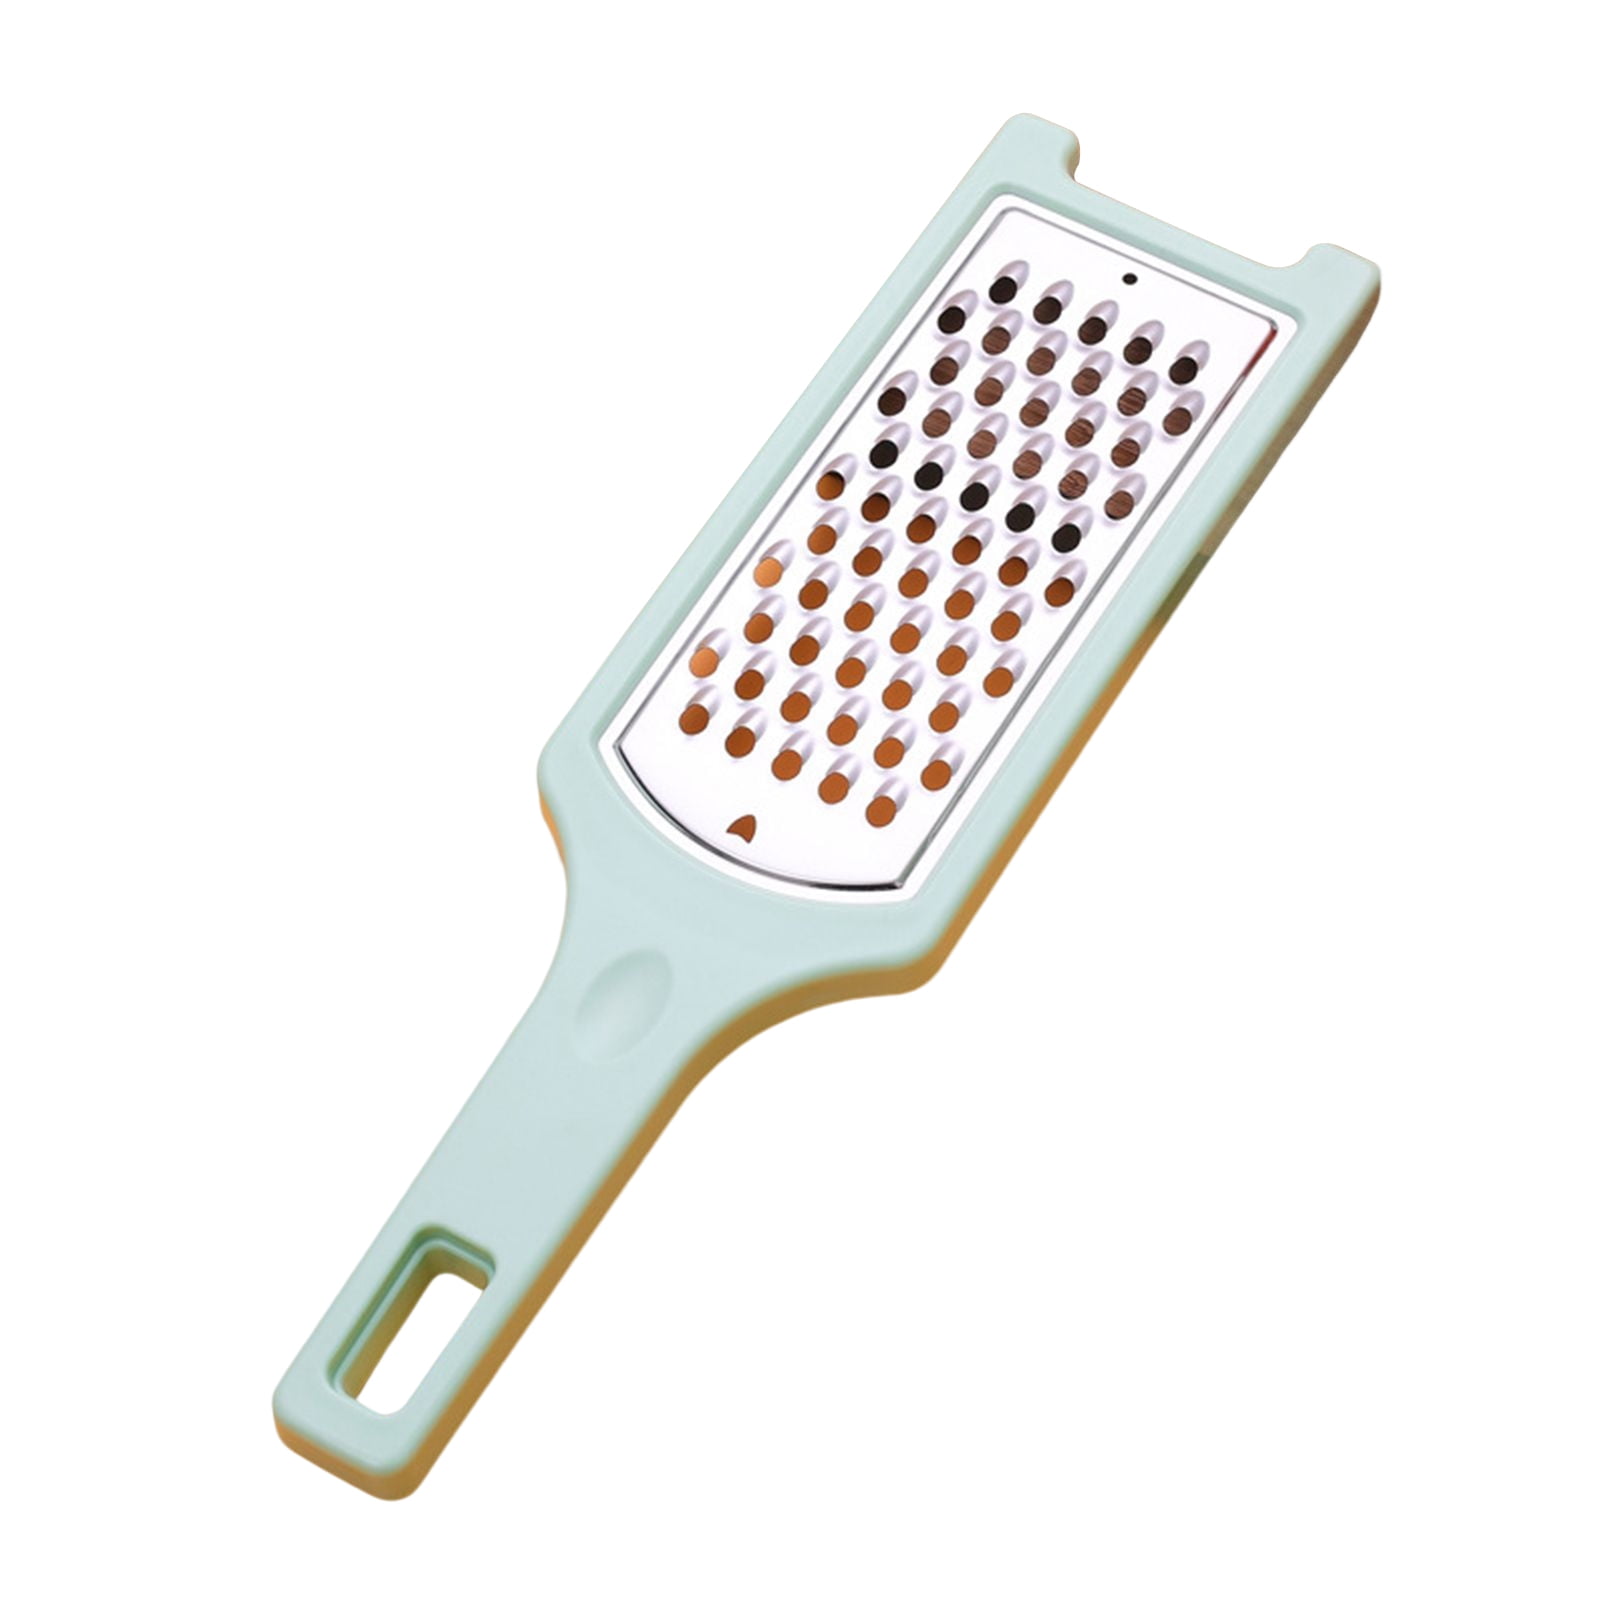 Bobasndm Cheese Grater with Handle,Cheese Grater, Handheld Rotary Cheese  Grater, Olive Garden Cheese Grater with 3 Stainless Steel Drums for Hard  Cheese, Chocolate, Nuts 